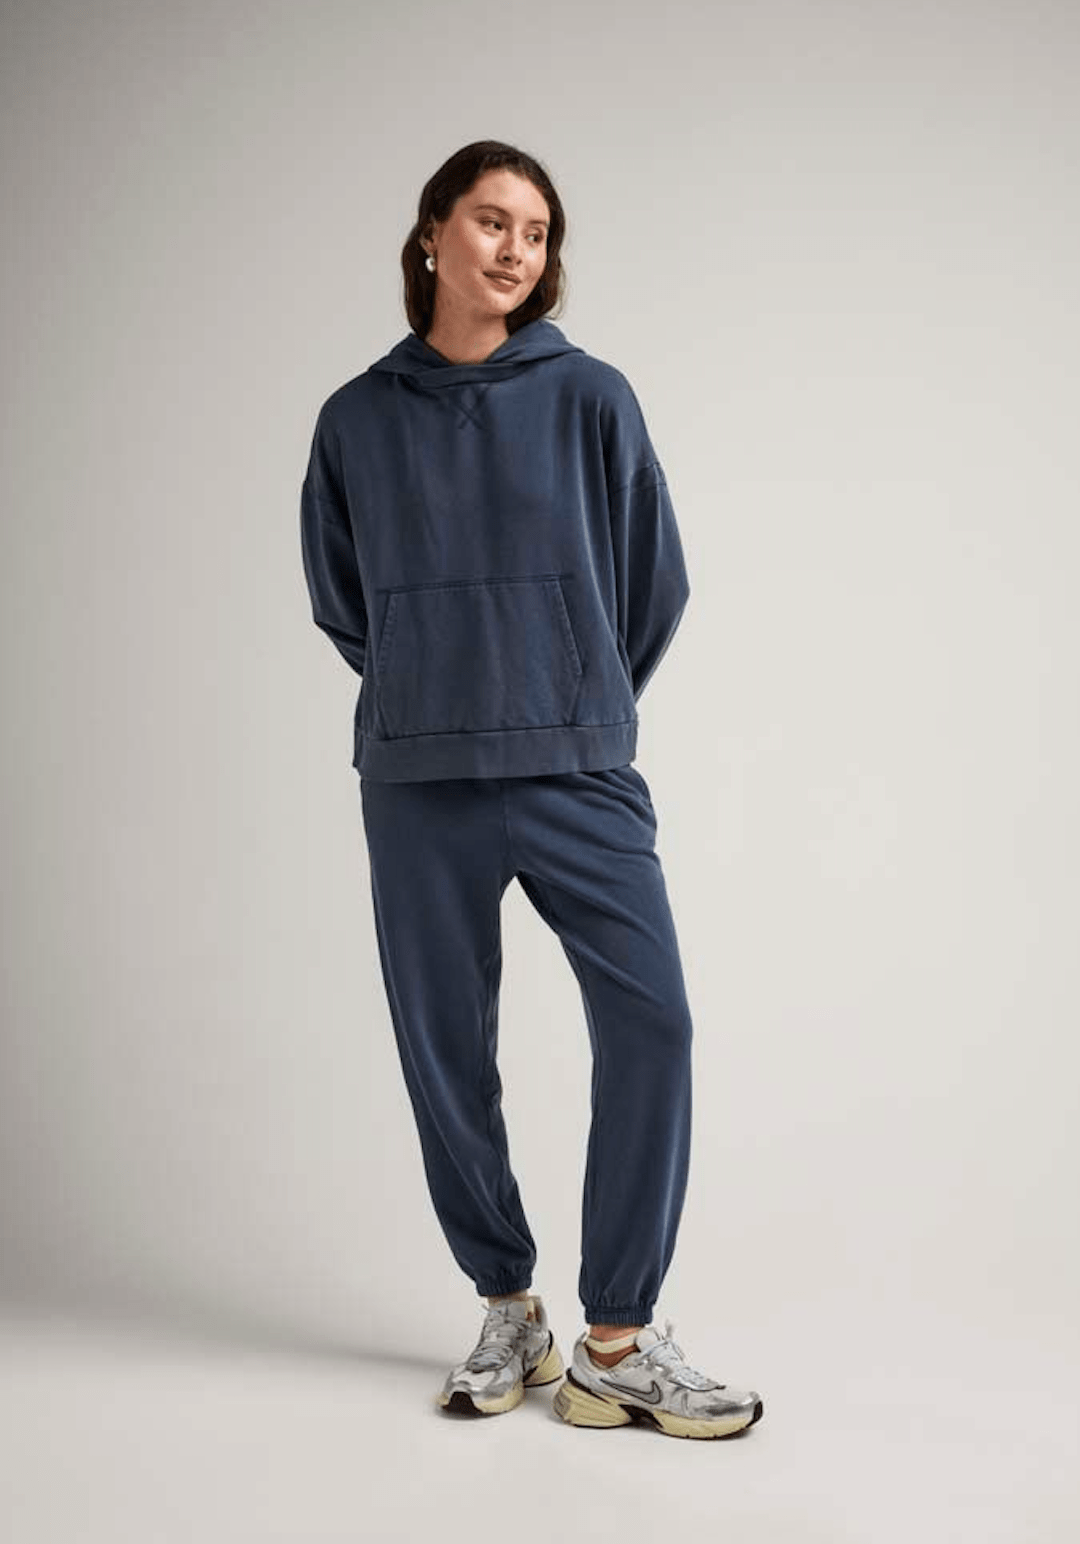 Richer Poorer pants and leggings Richer Poorer Recycled Fleece Classic Sweatpant